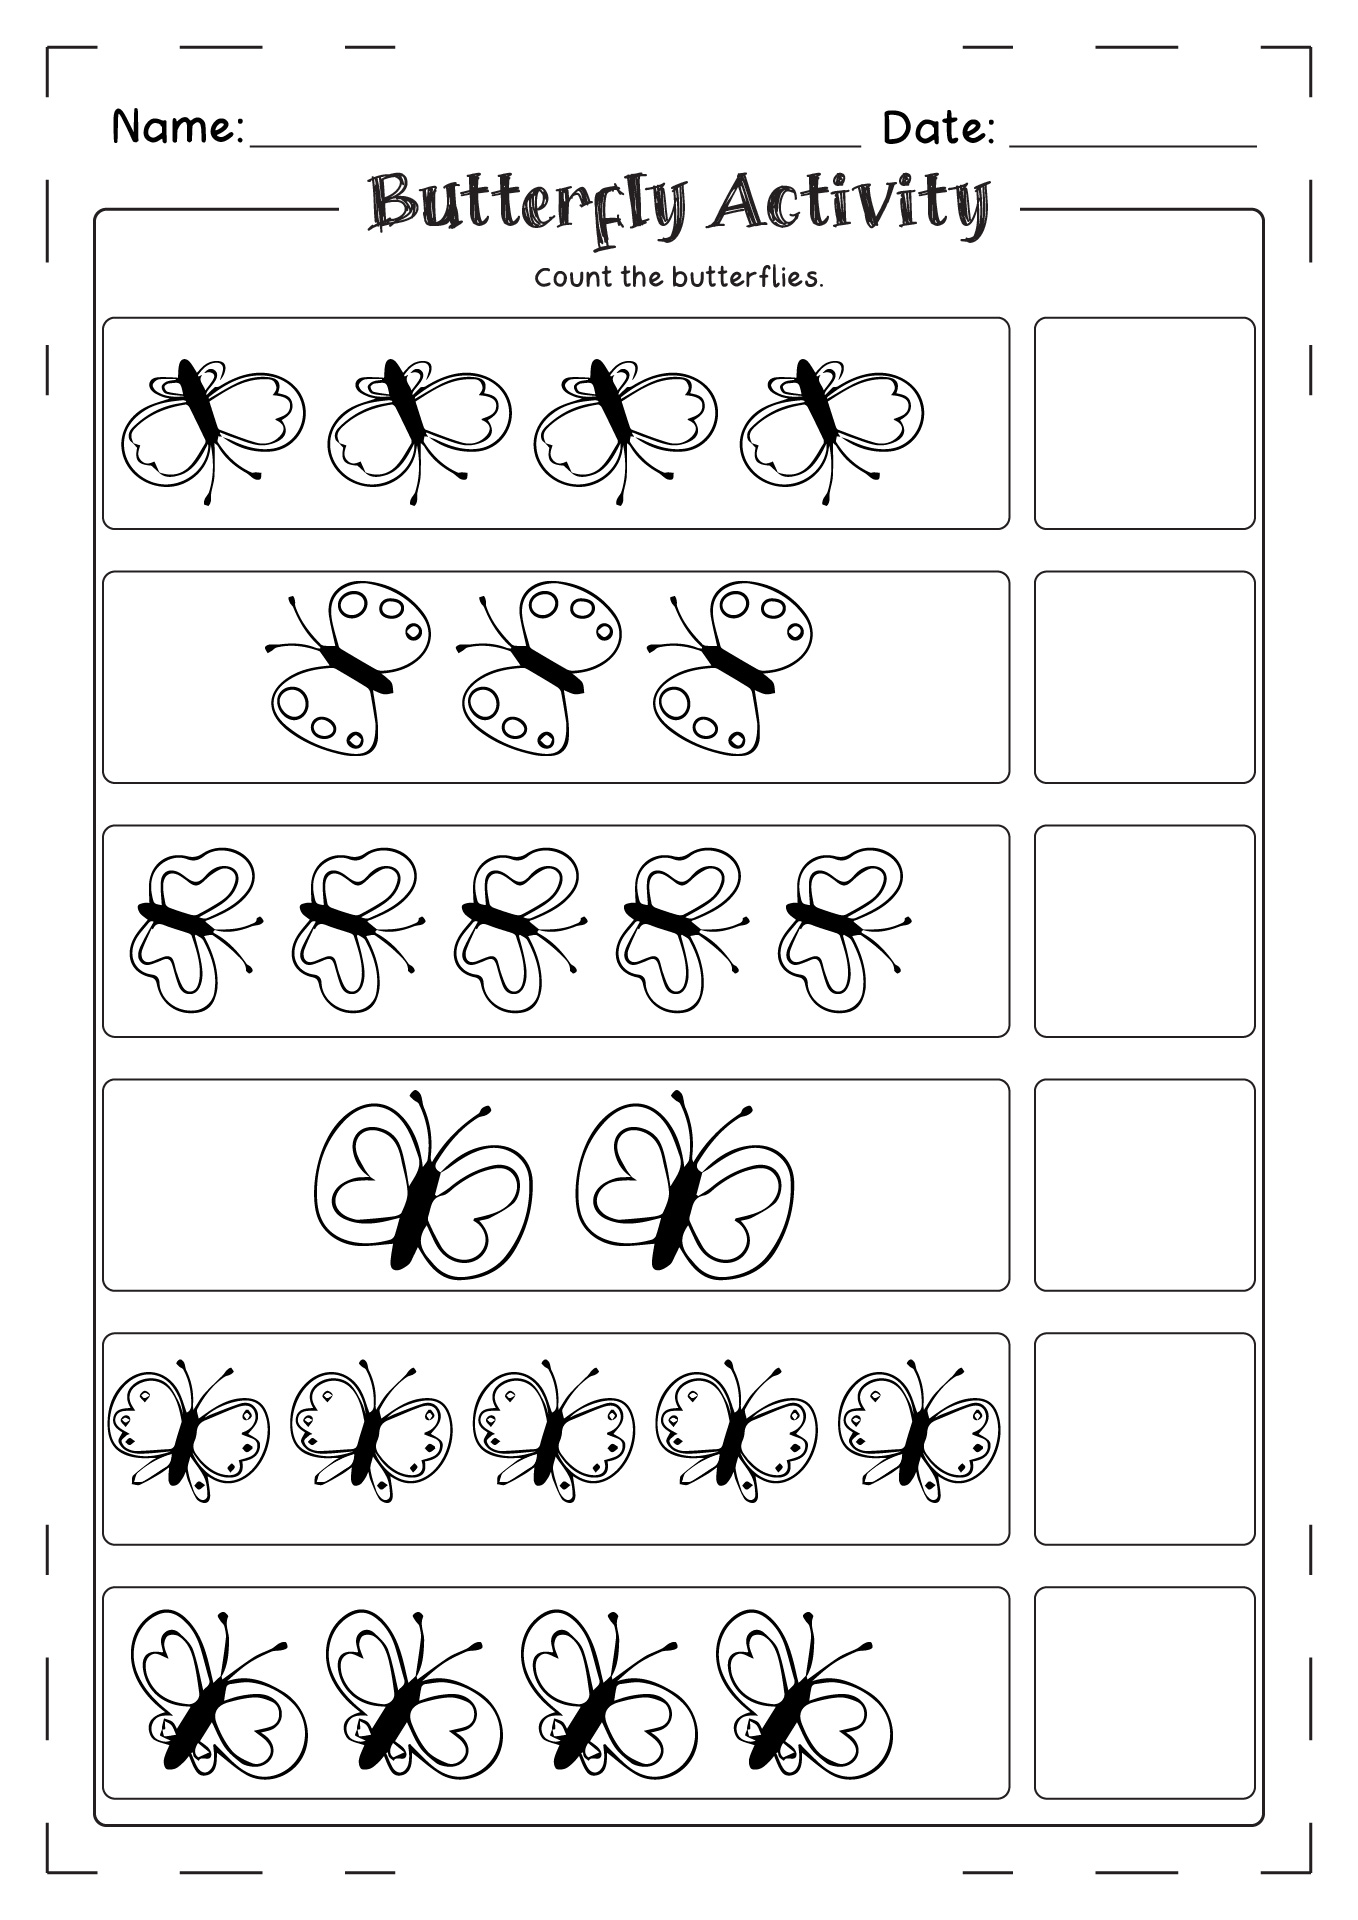 Butterfly Activity Worksheets